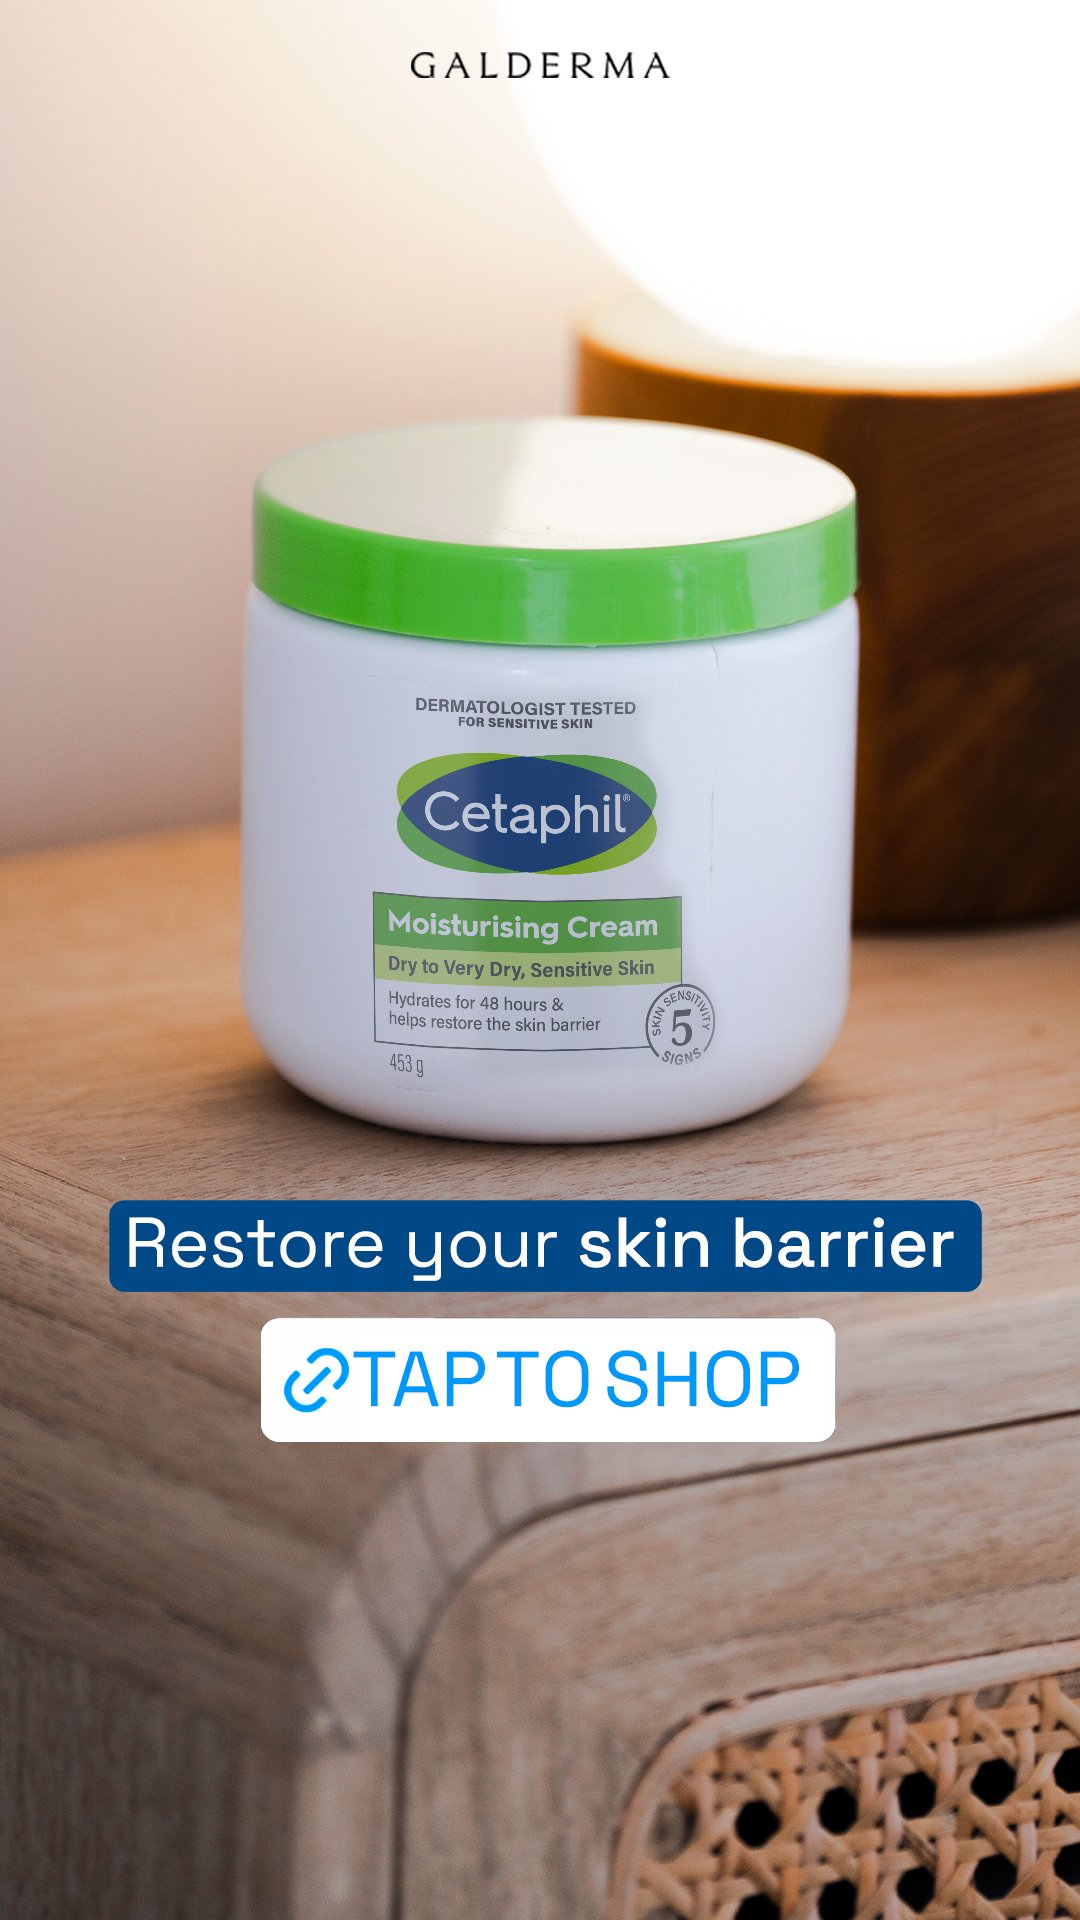 Cetaphil® Empowers Those with Sensitive Skin to Live Life to the Fullest 3